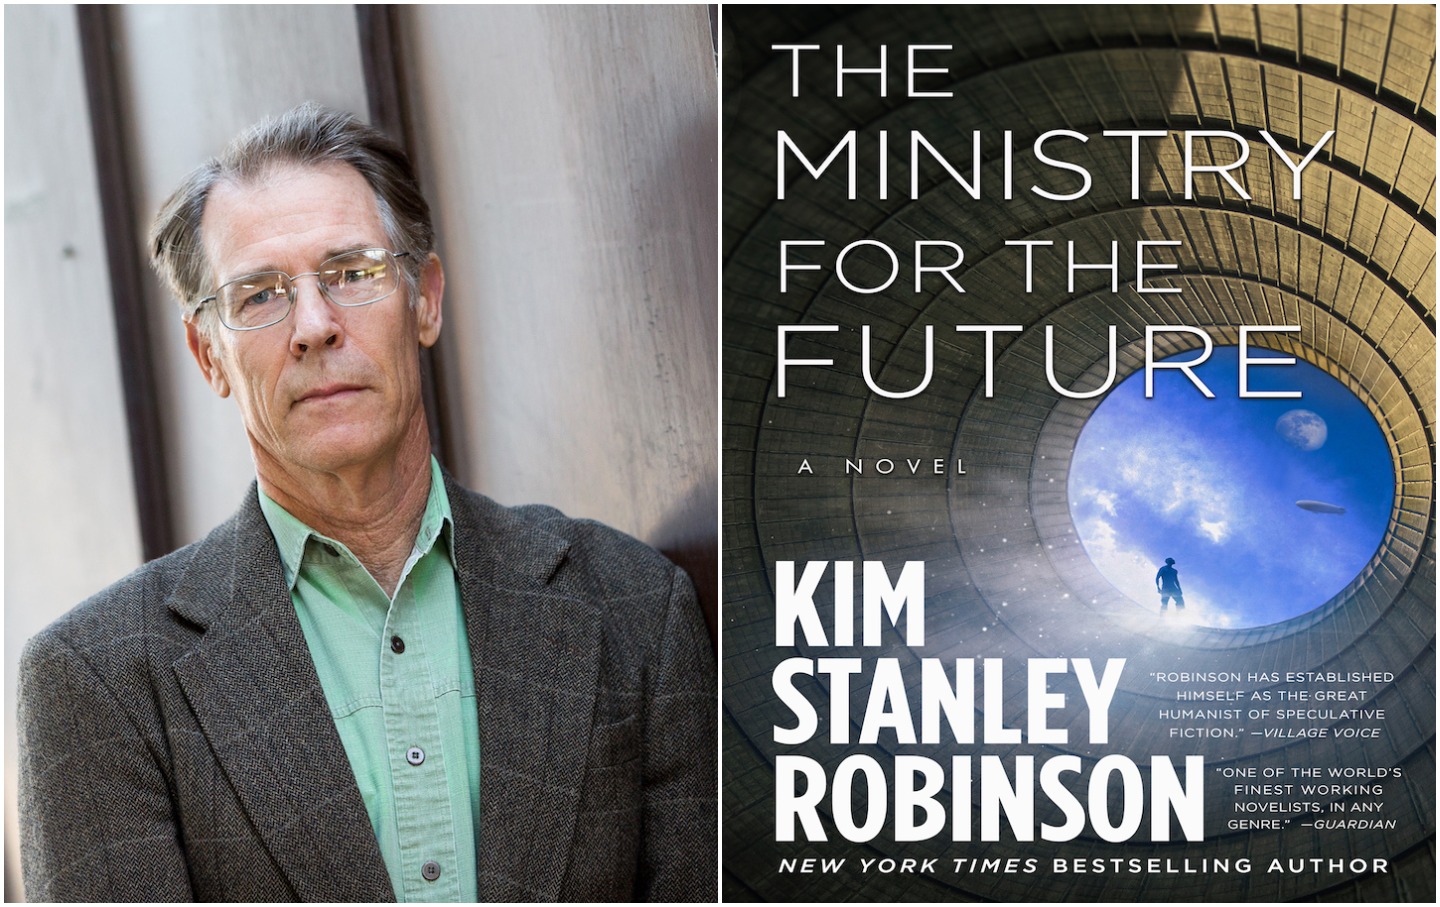 Kim Stanley Robinson Bears Witness to Our Climate Futures